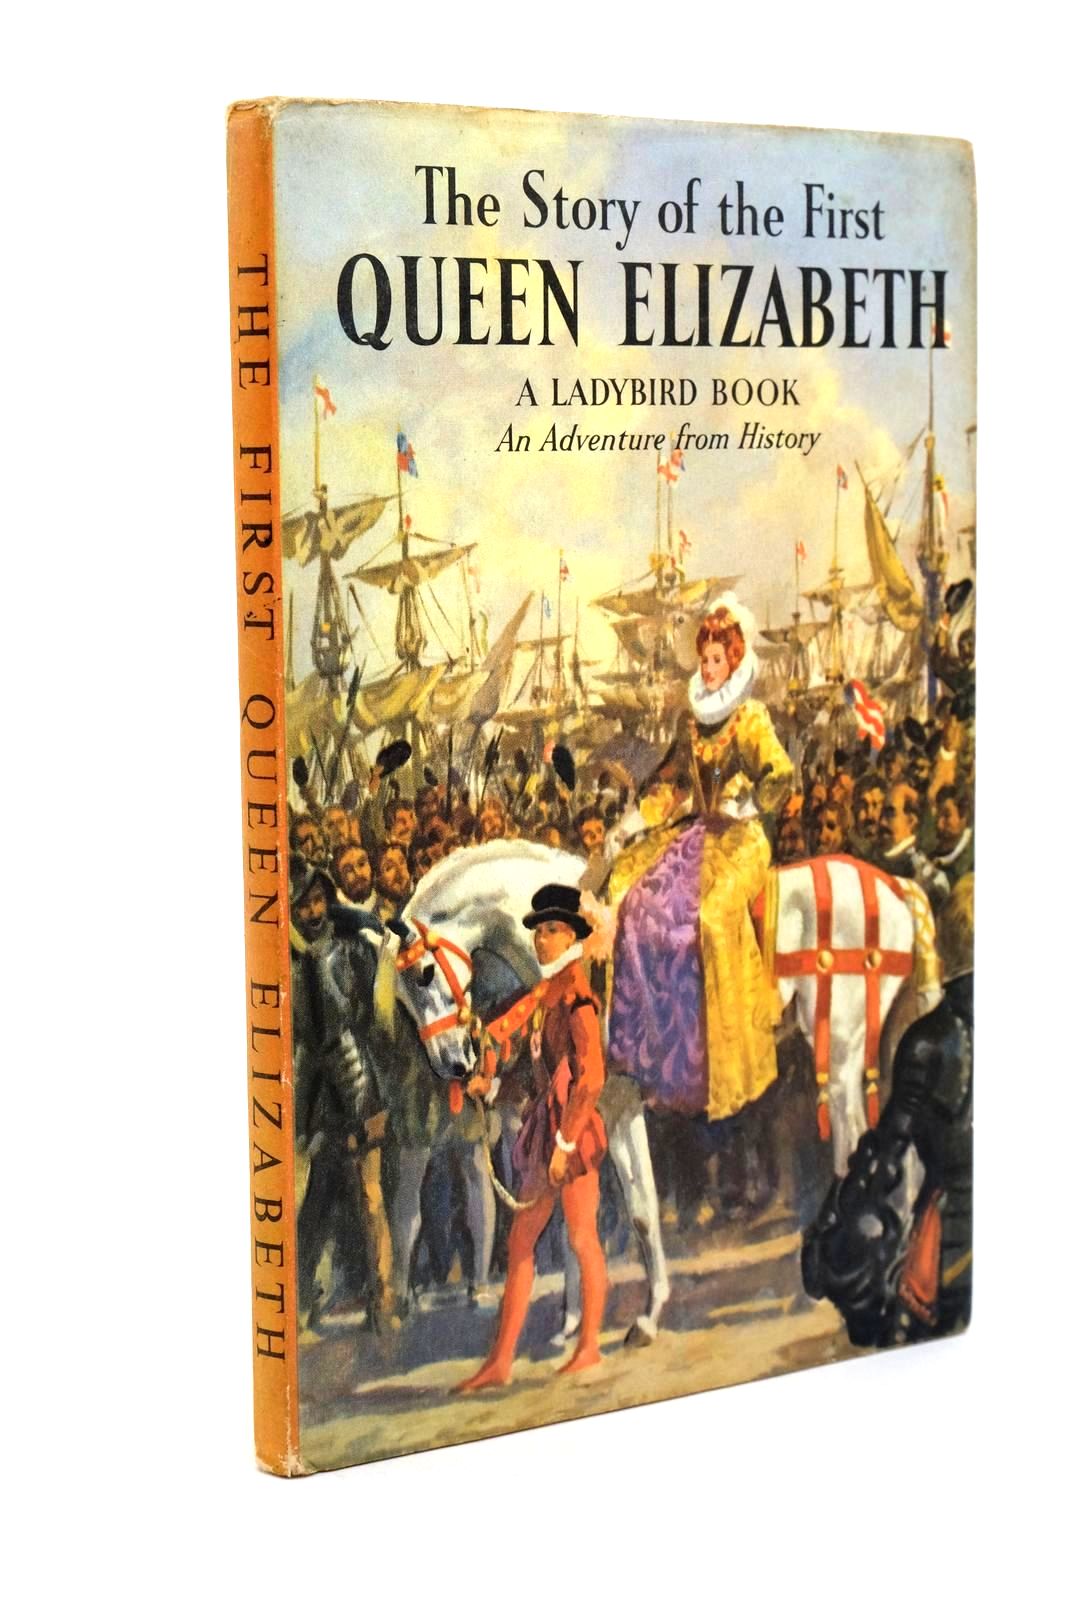 Photo of THE STORY OF THE FIRST QUEEN ELIZABETH written by Peach, L. Du Garde illustrated by Kenney, John published by Wills &amp; Hepworth Ltd. (STOCK CODE: 1321728)  for sale by Stella & Rose's Books